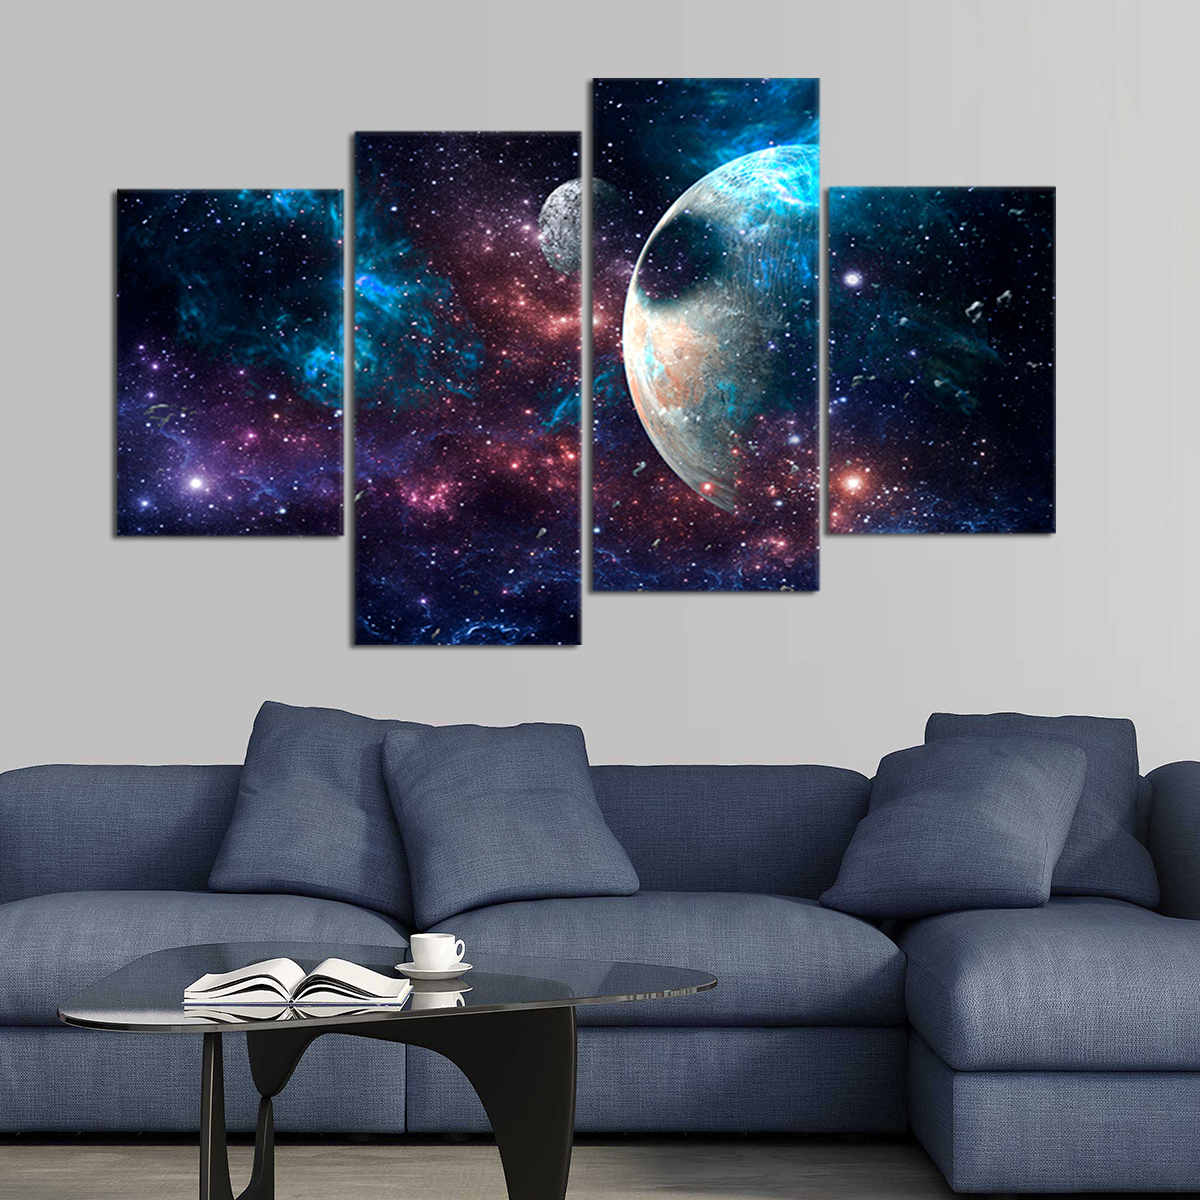 Planets And Galaxy Canvas Wall Art